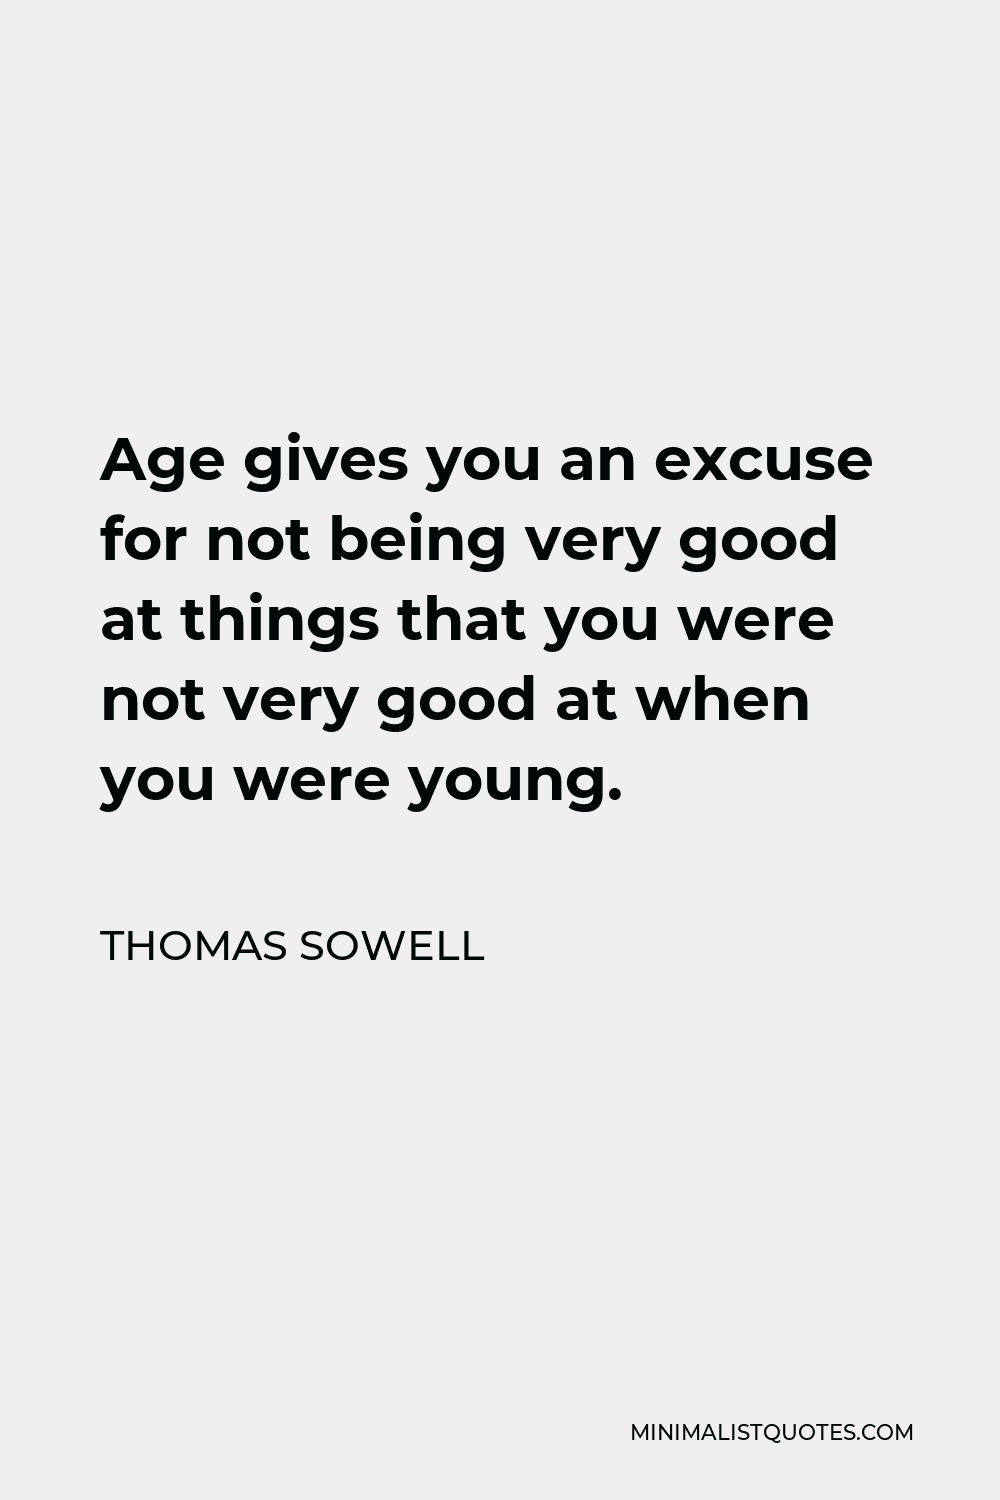 Thomas Sowell Quote - Age gives you an excuse for not being very good at things that you were not very good at when you were young.